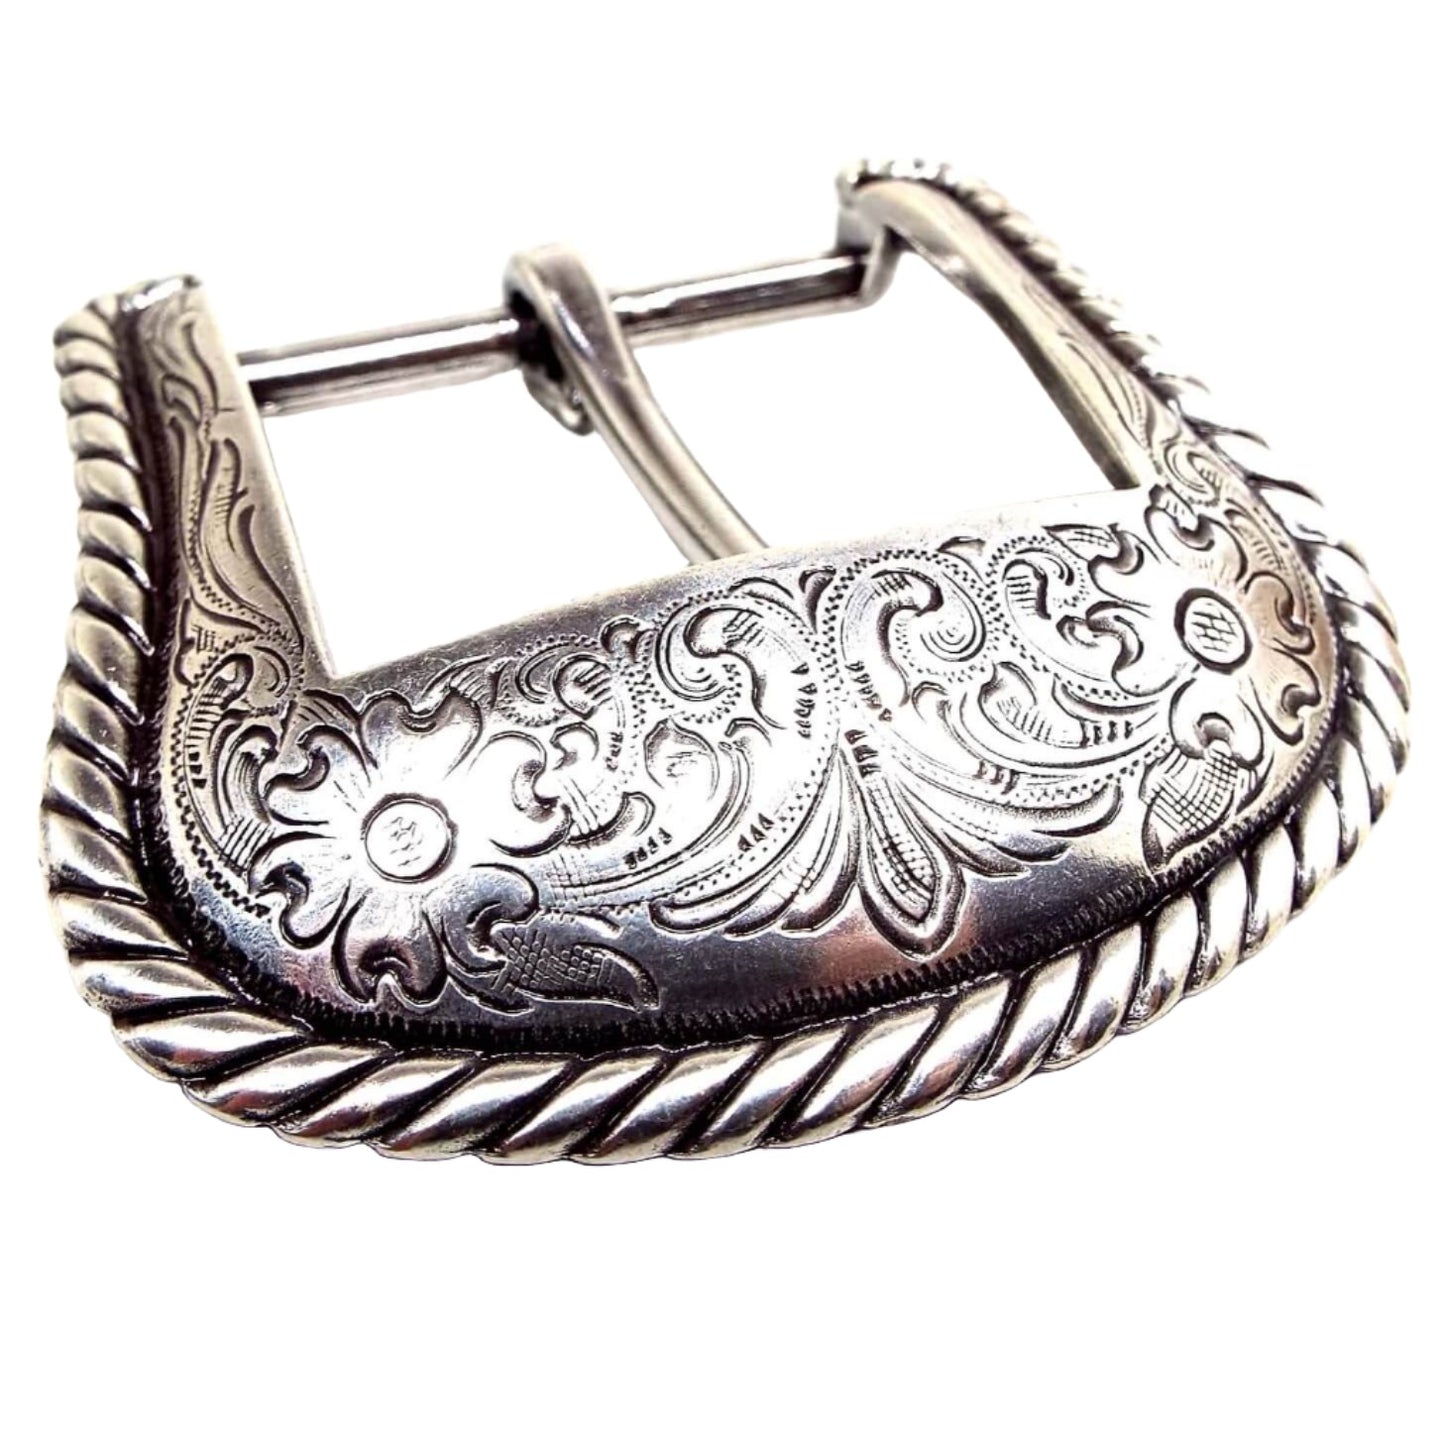 Front view of the Western style belt buckle. It is silver tone in color and has an open bar on the back with the prong on it. The front has an etched floral pattern and a twisted rope design around the edge.